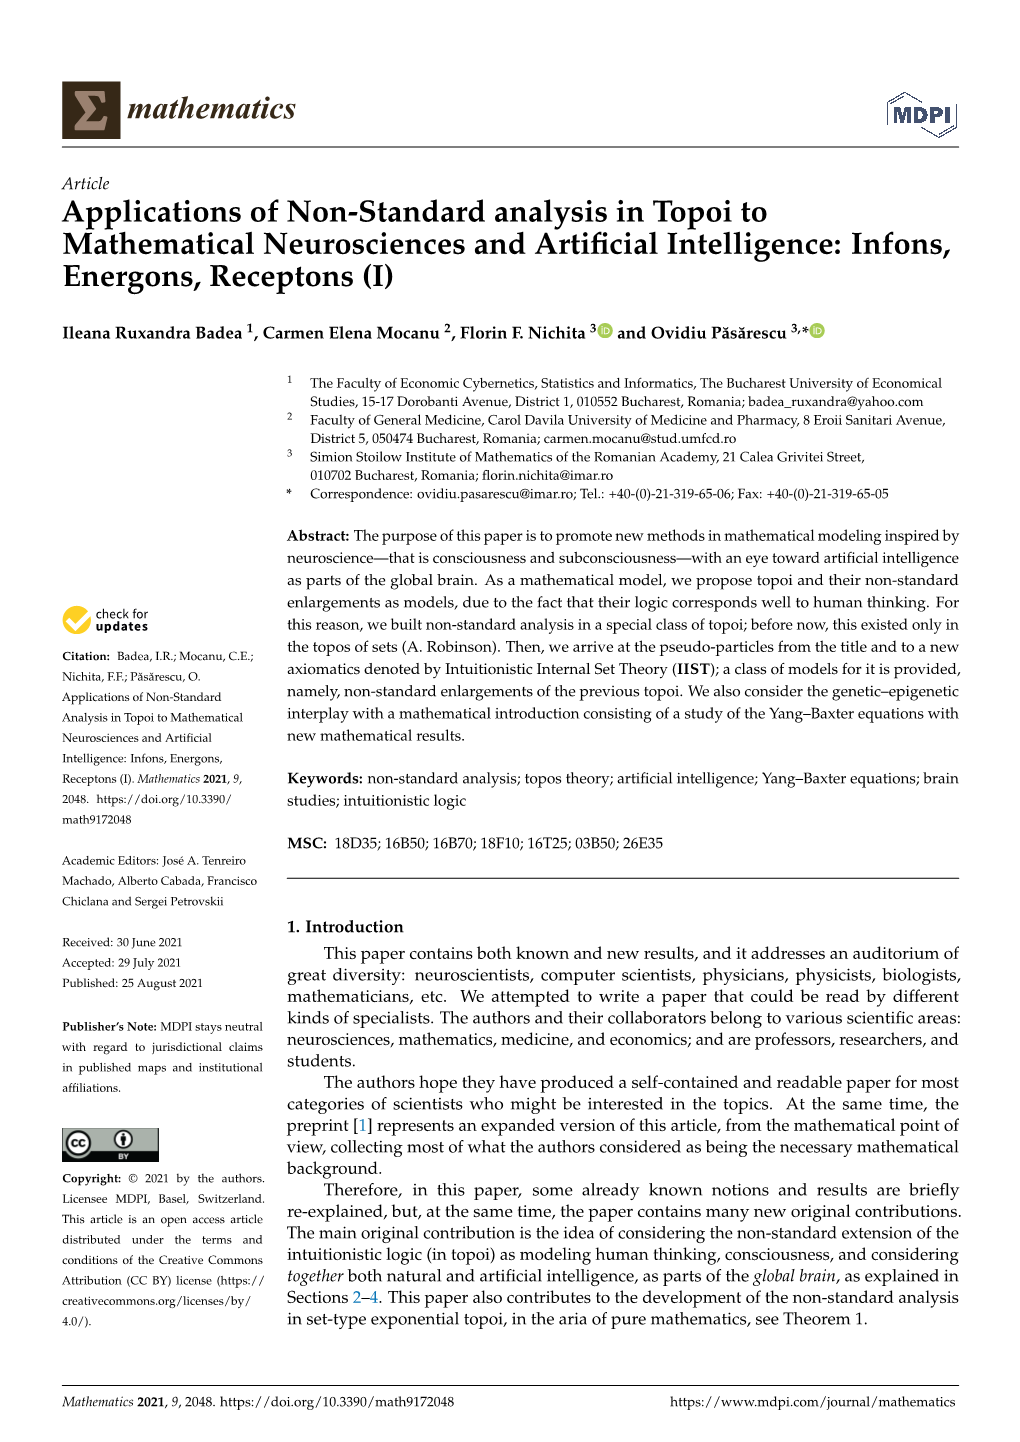 Applications of Non-Standard Analysis in Topoi to Mathematical Neurosciences and Artiﬁcial Intelligence: Infons, Energons, Receptons (I)